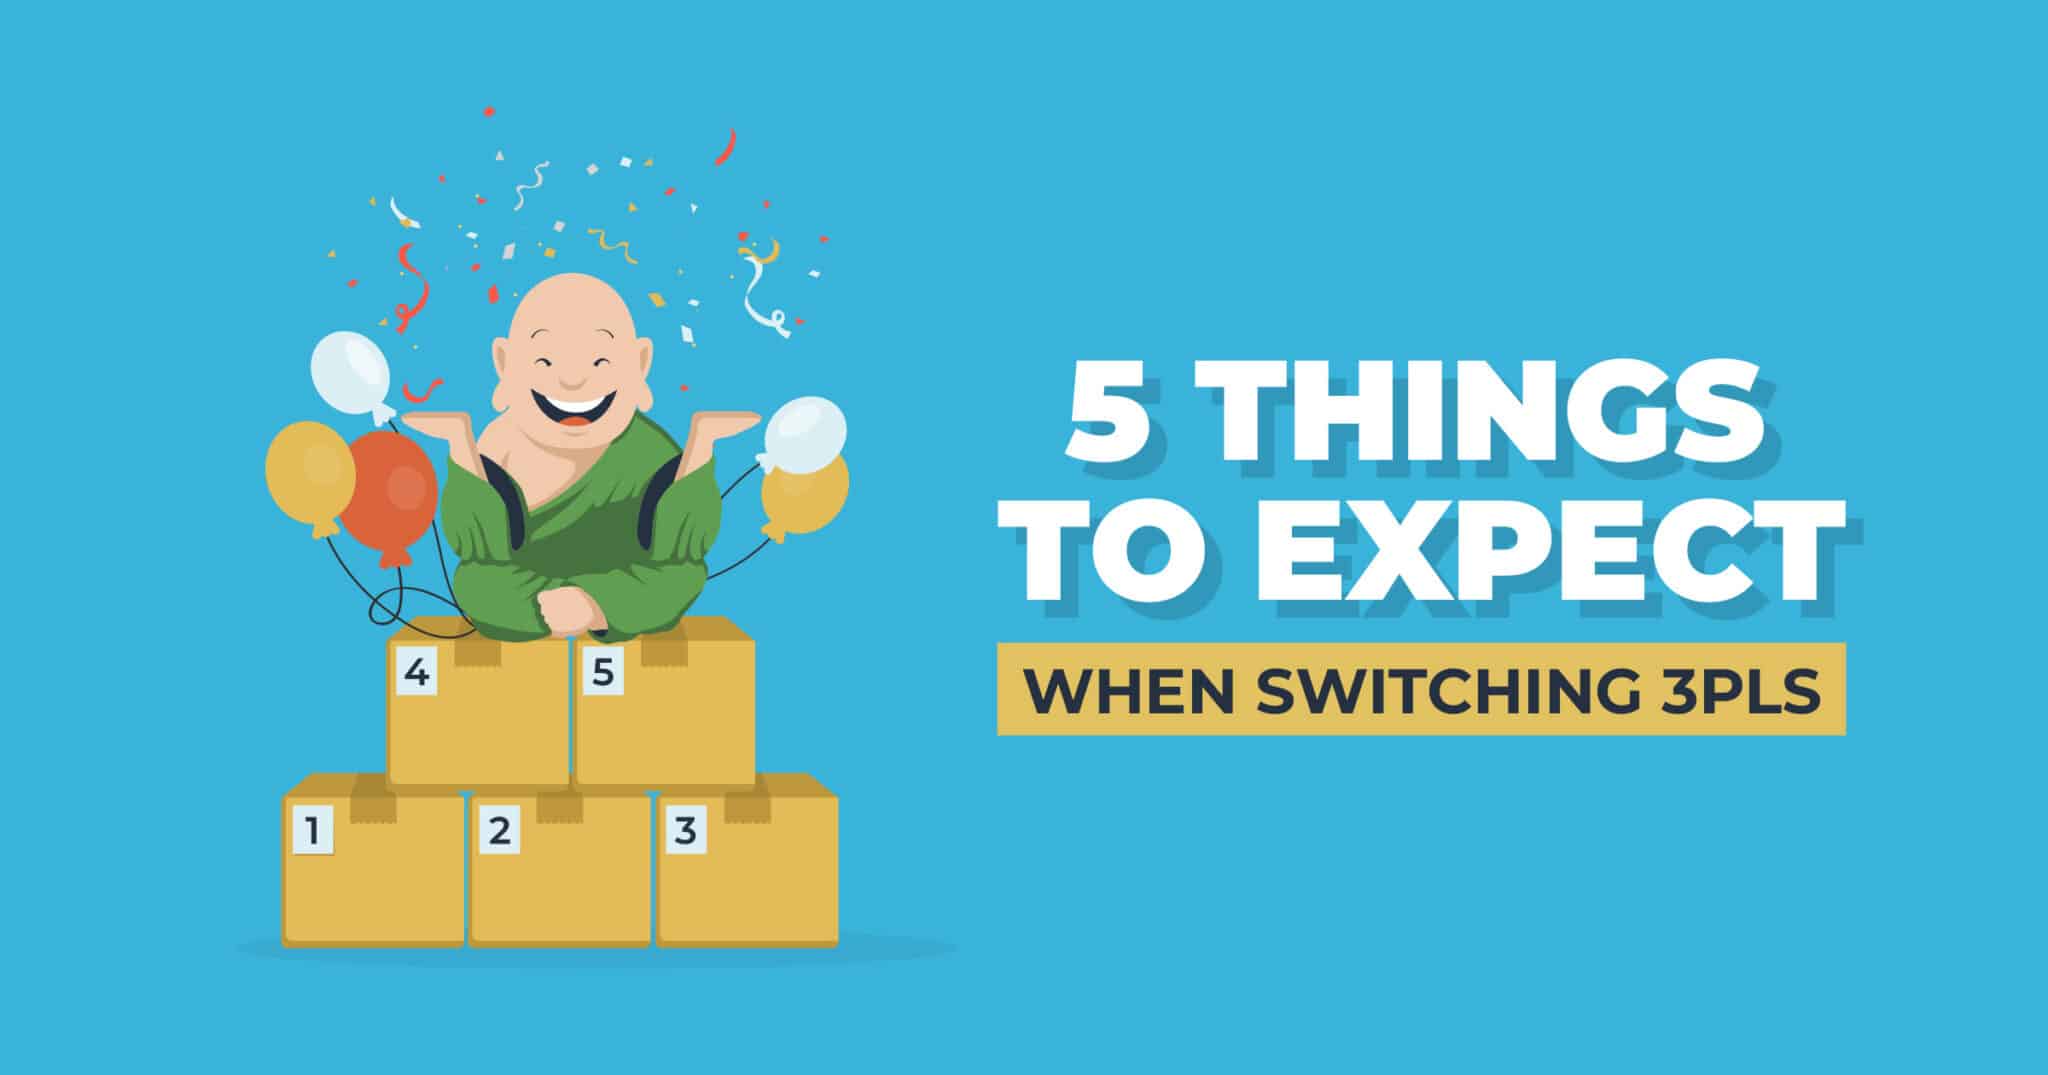 5 Things to Expect When Swithcing 3PLs